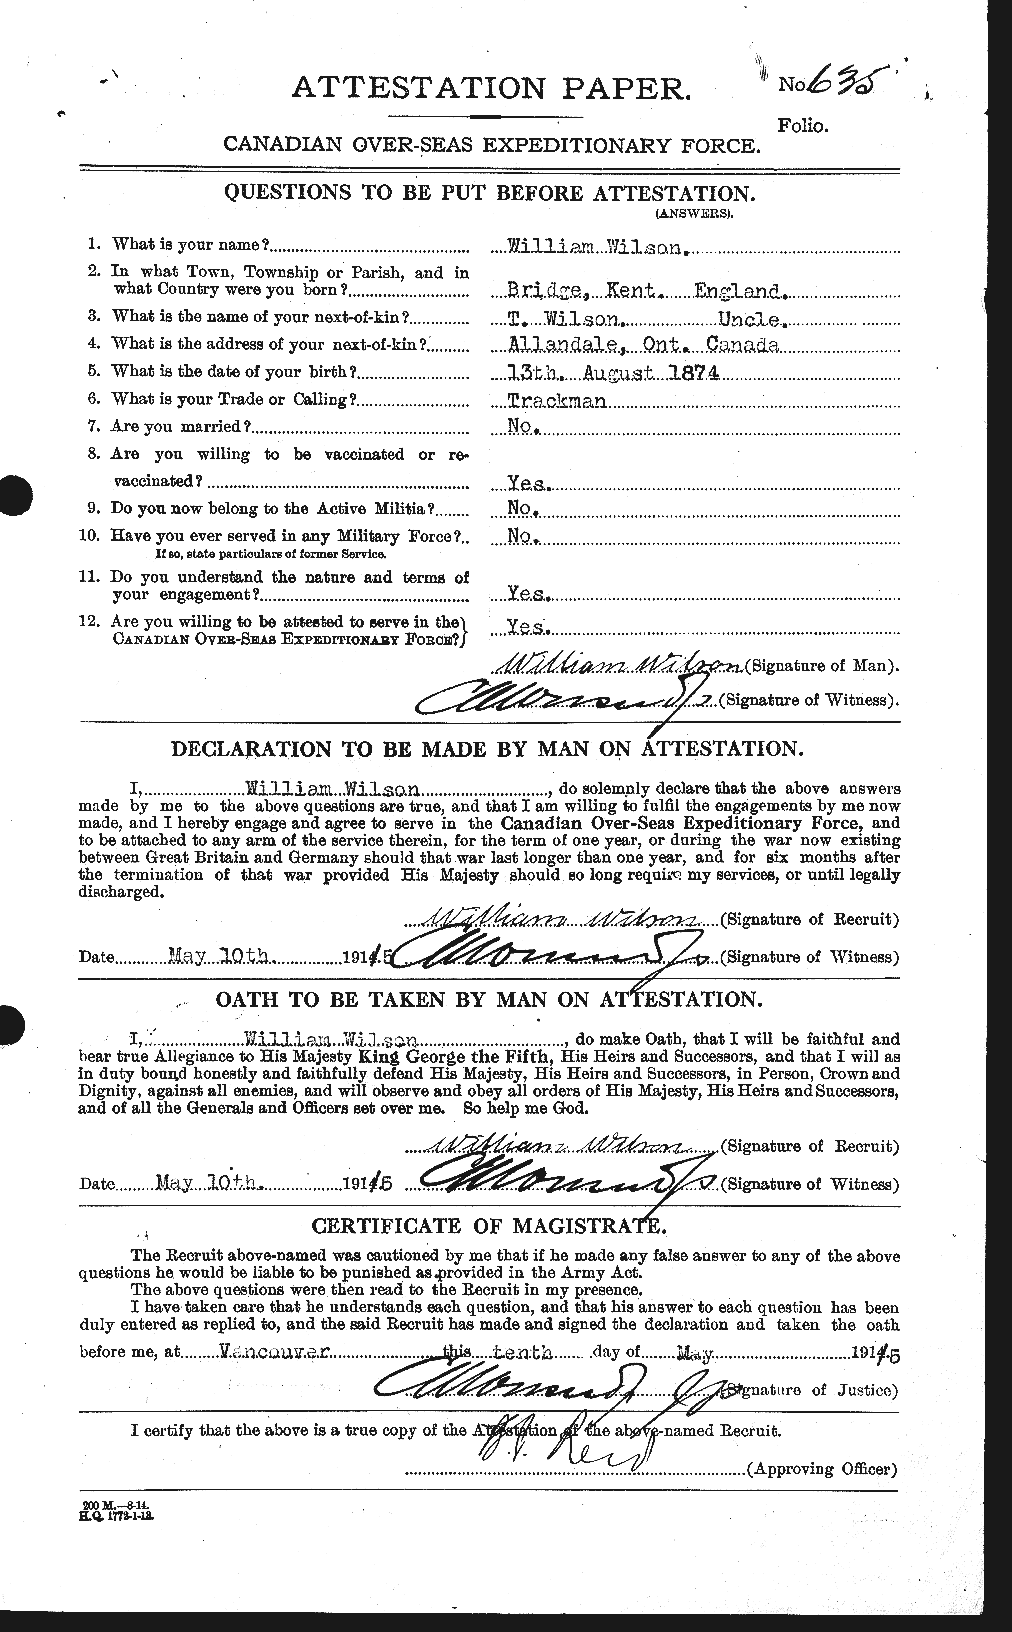 Personnel Records of the First World War - CEF 681841a